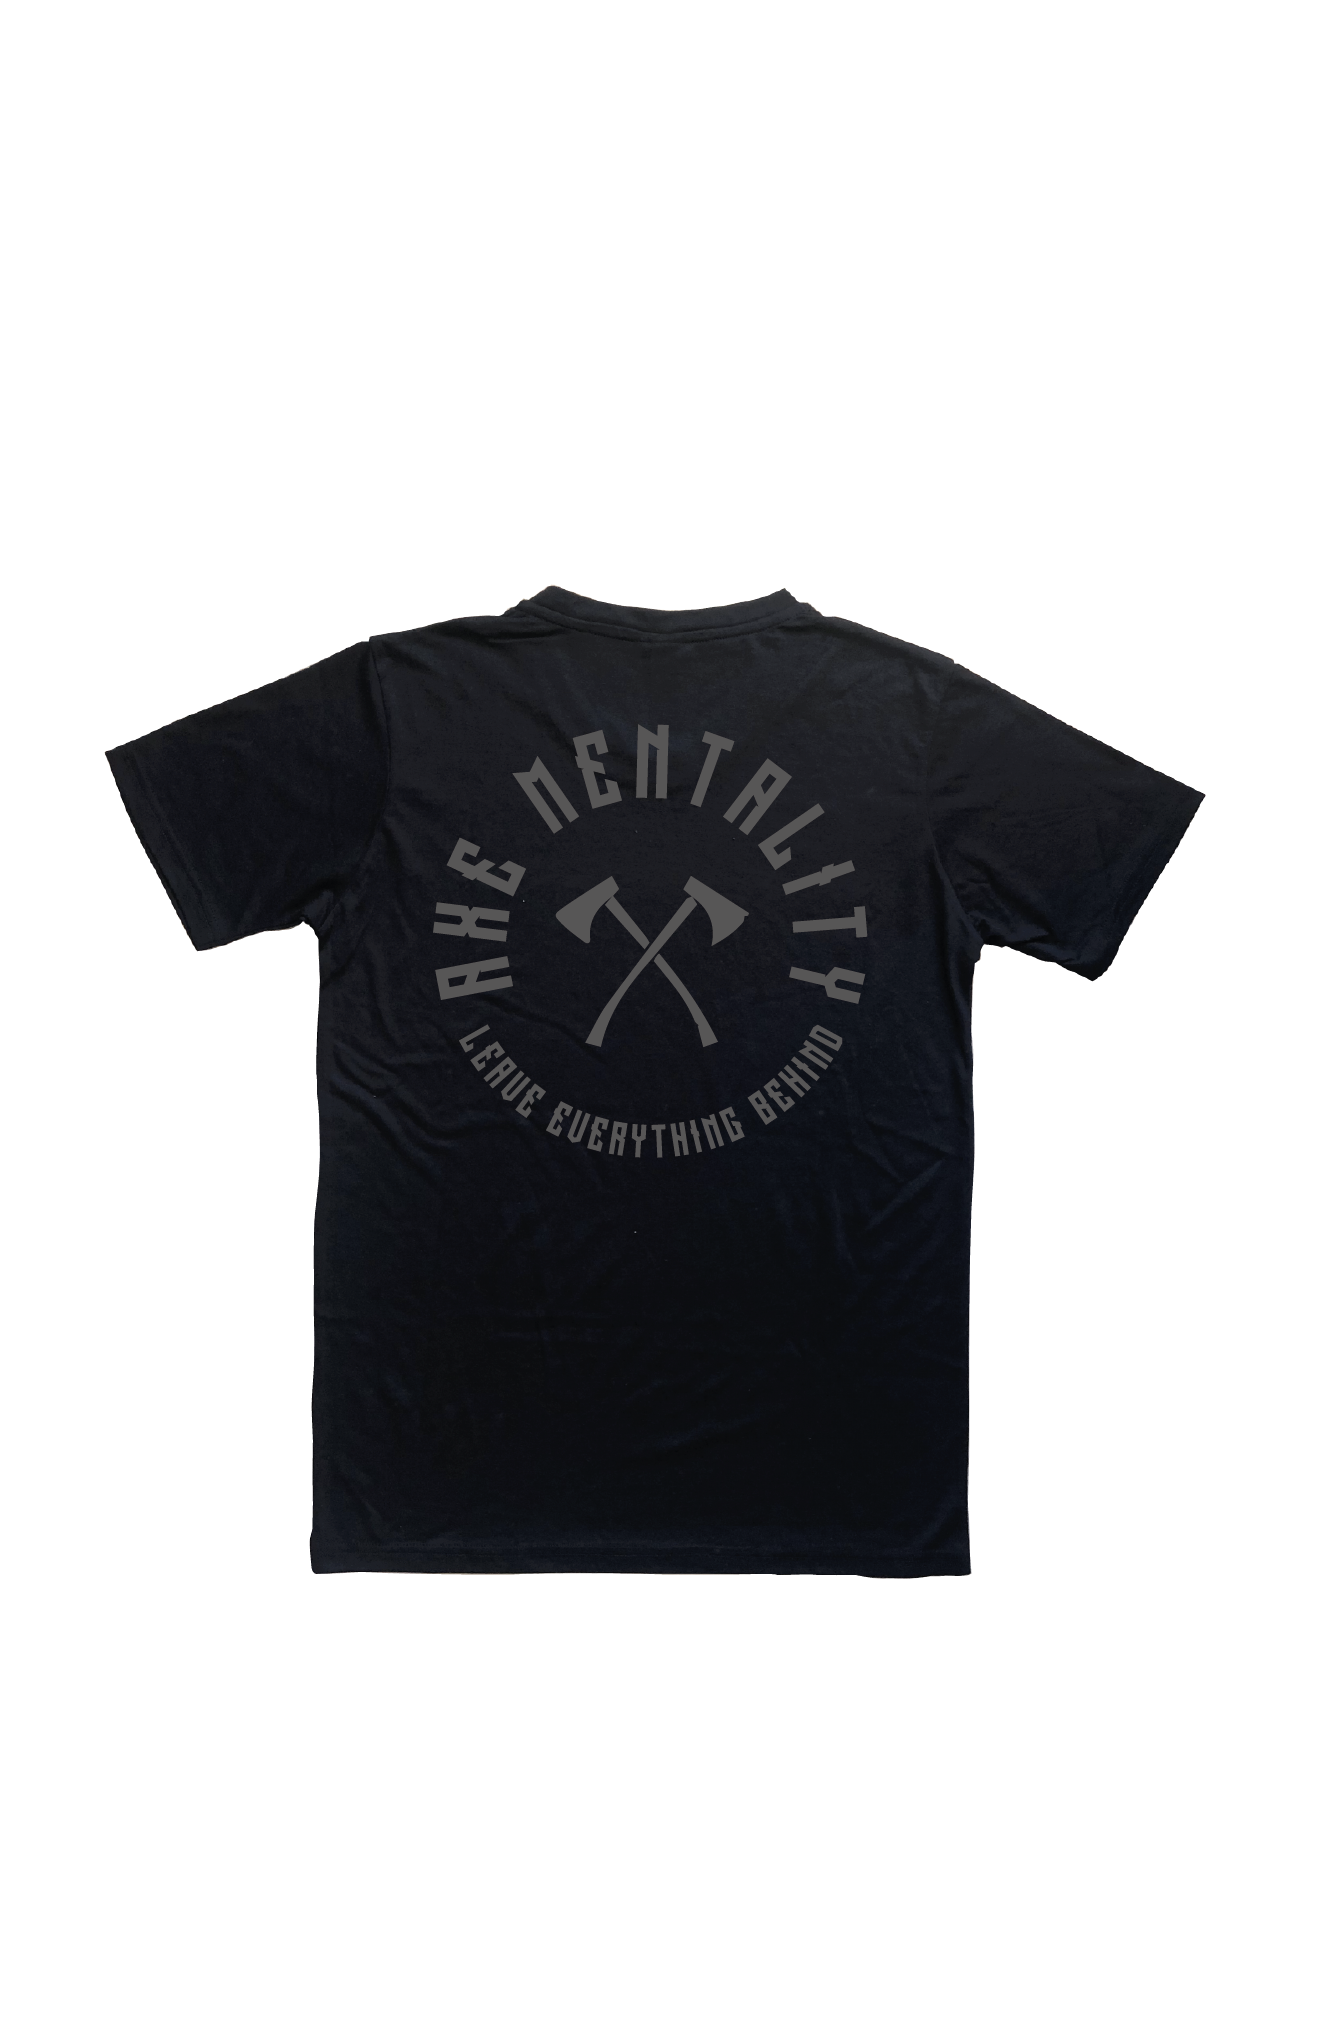 Black t-shirt with typographic print and an axe element printed on in grey